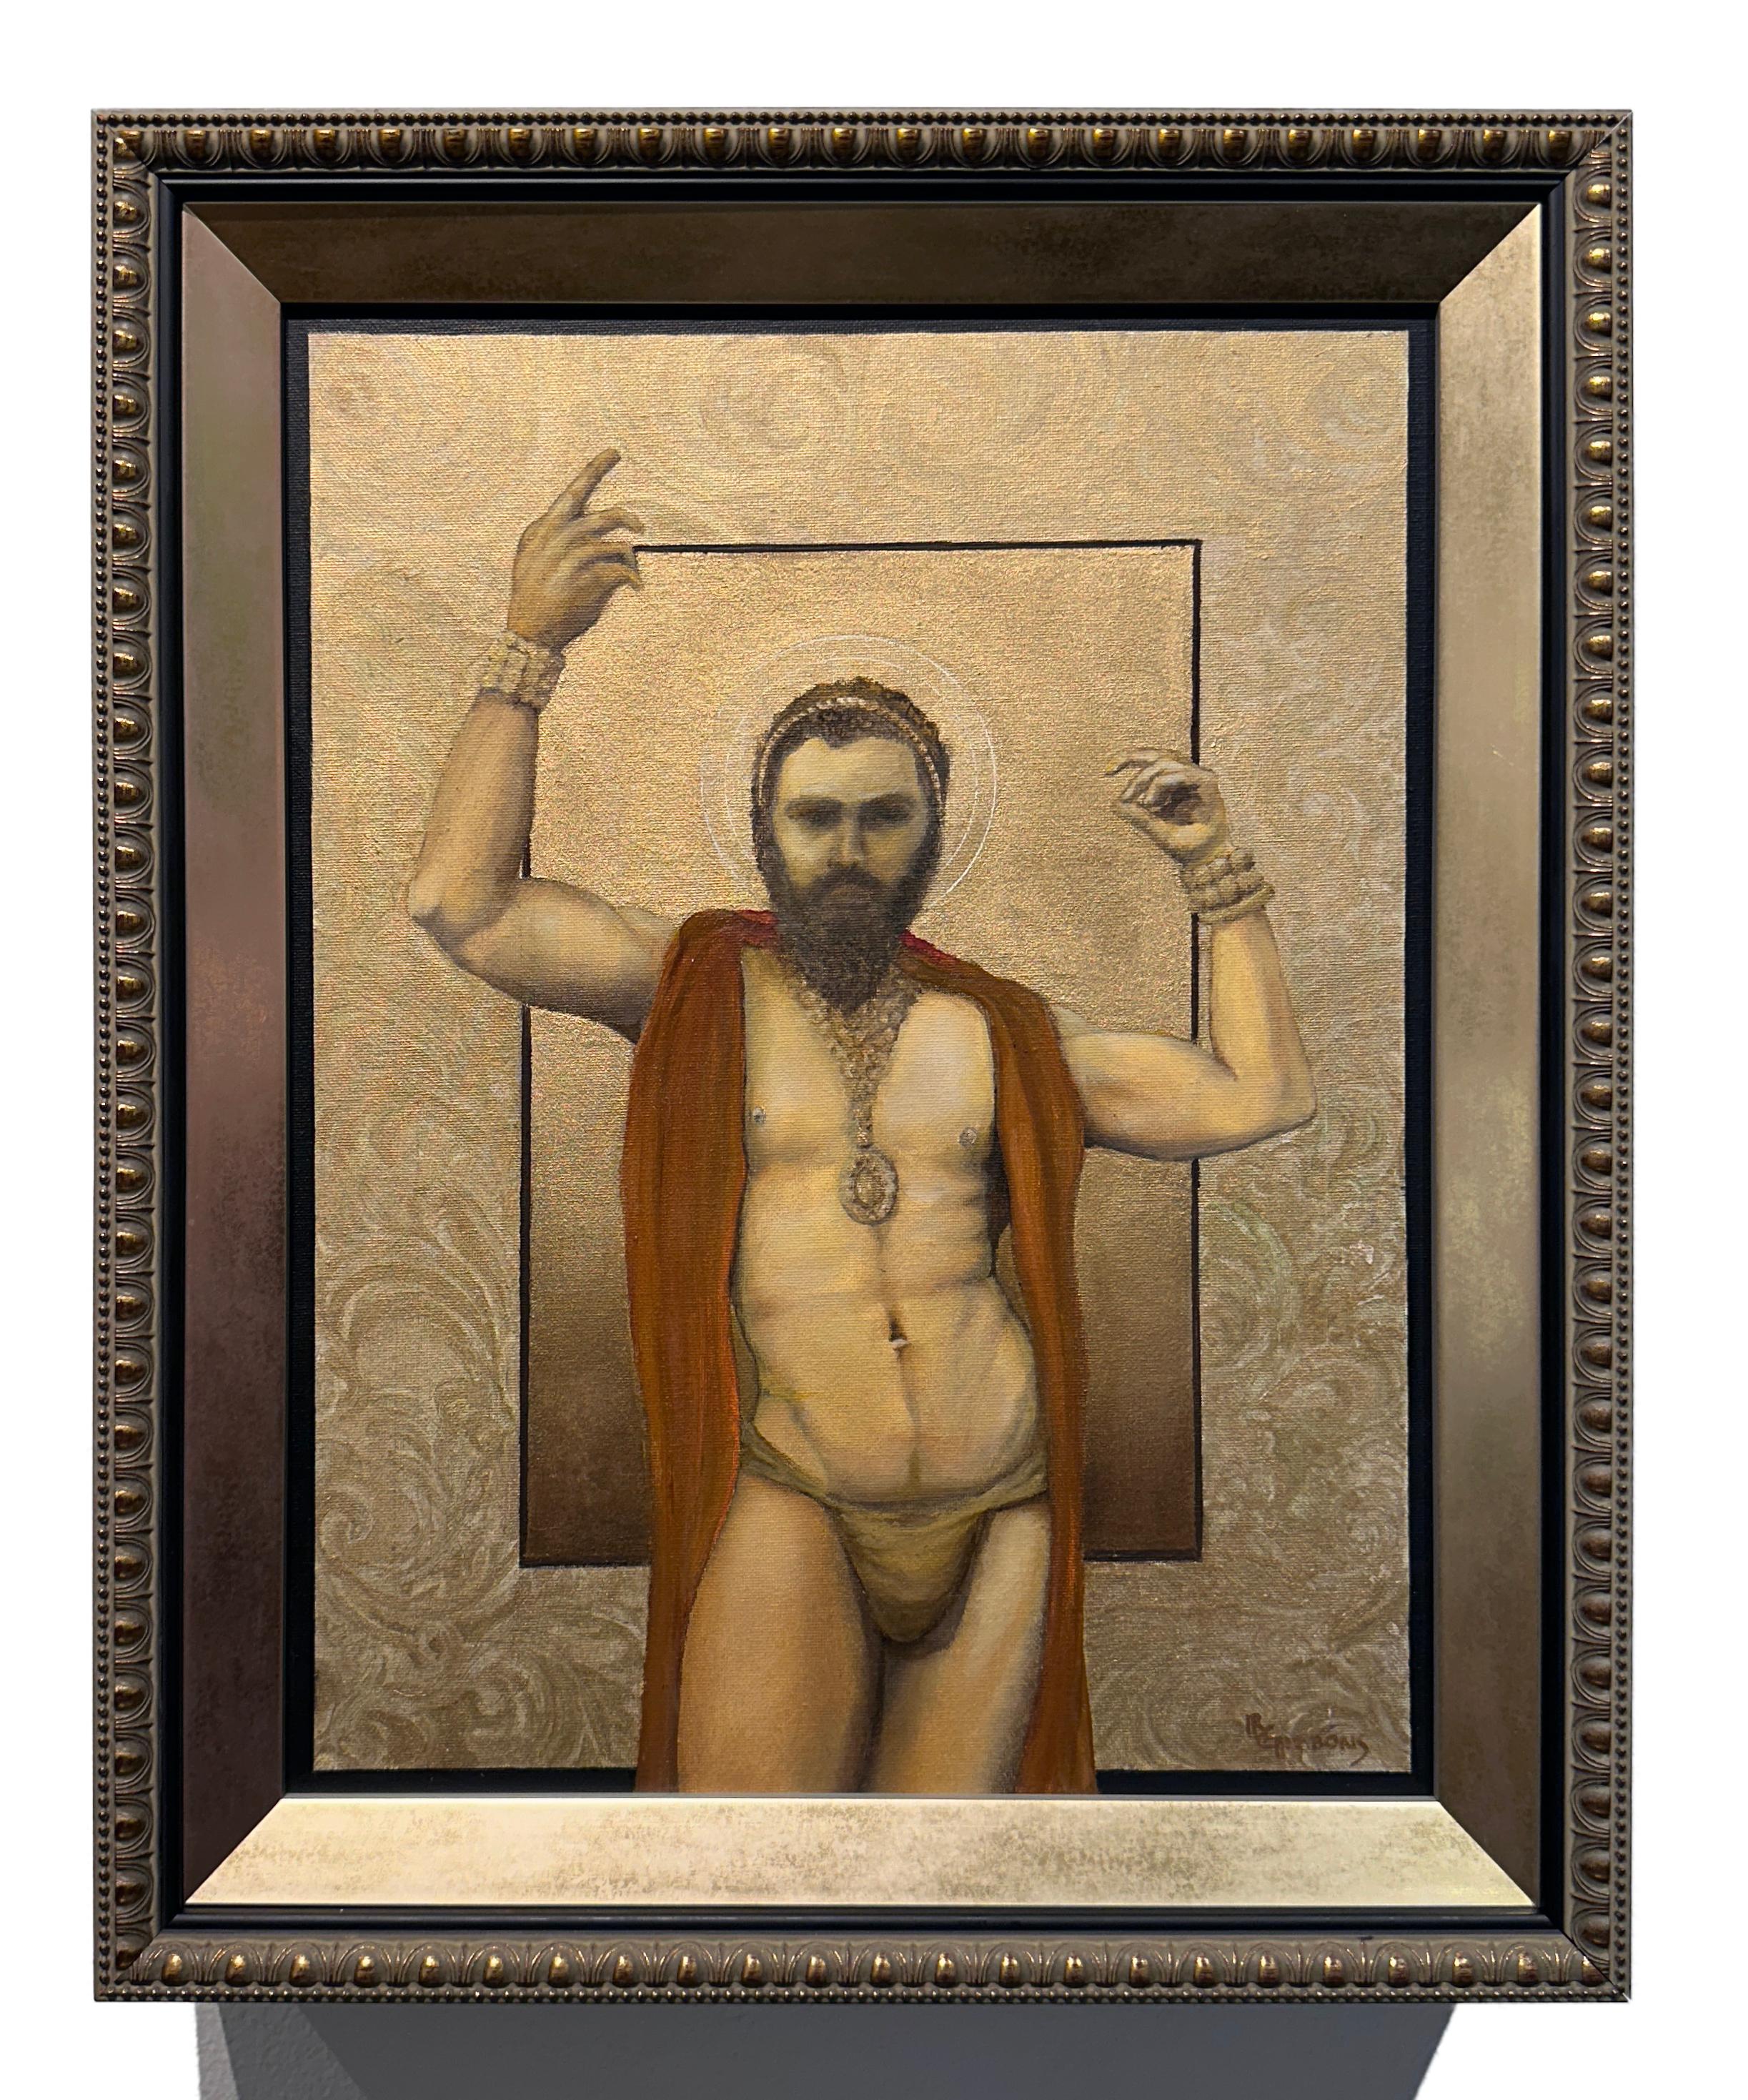 The Priest King of Knossos, Muscular Male, Original Oil on Canvas - Contemporary Painting by Richard Gibbons